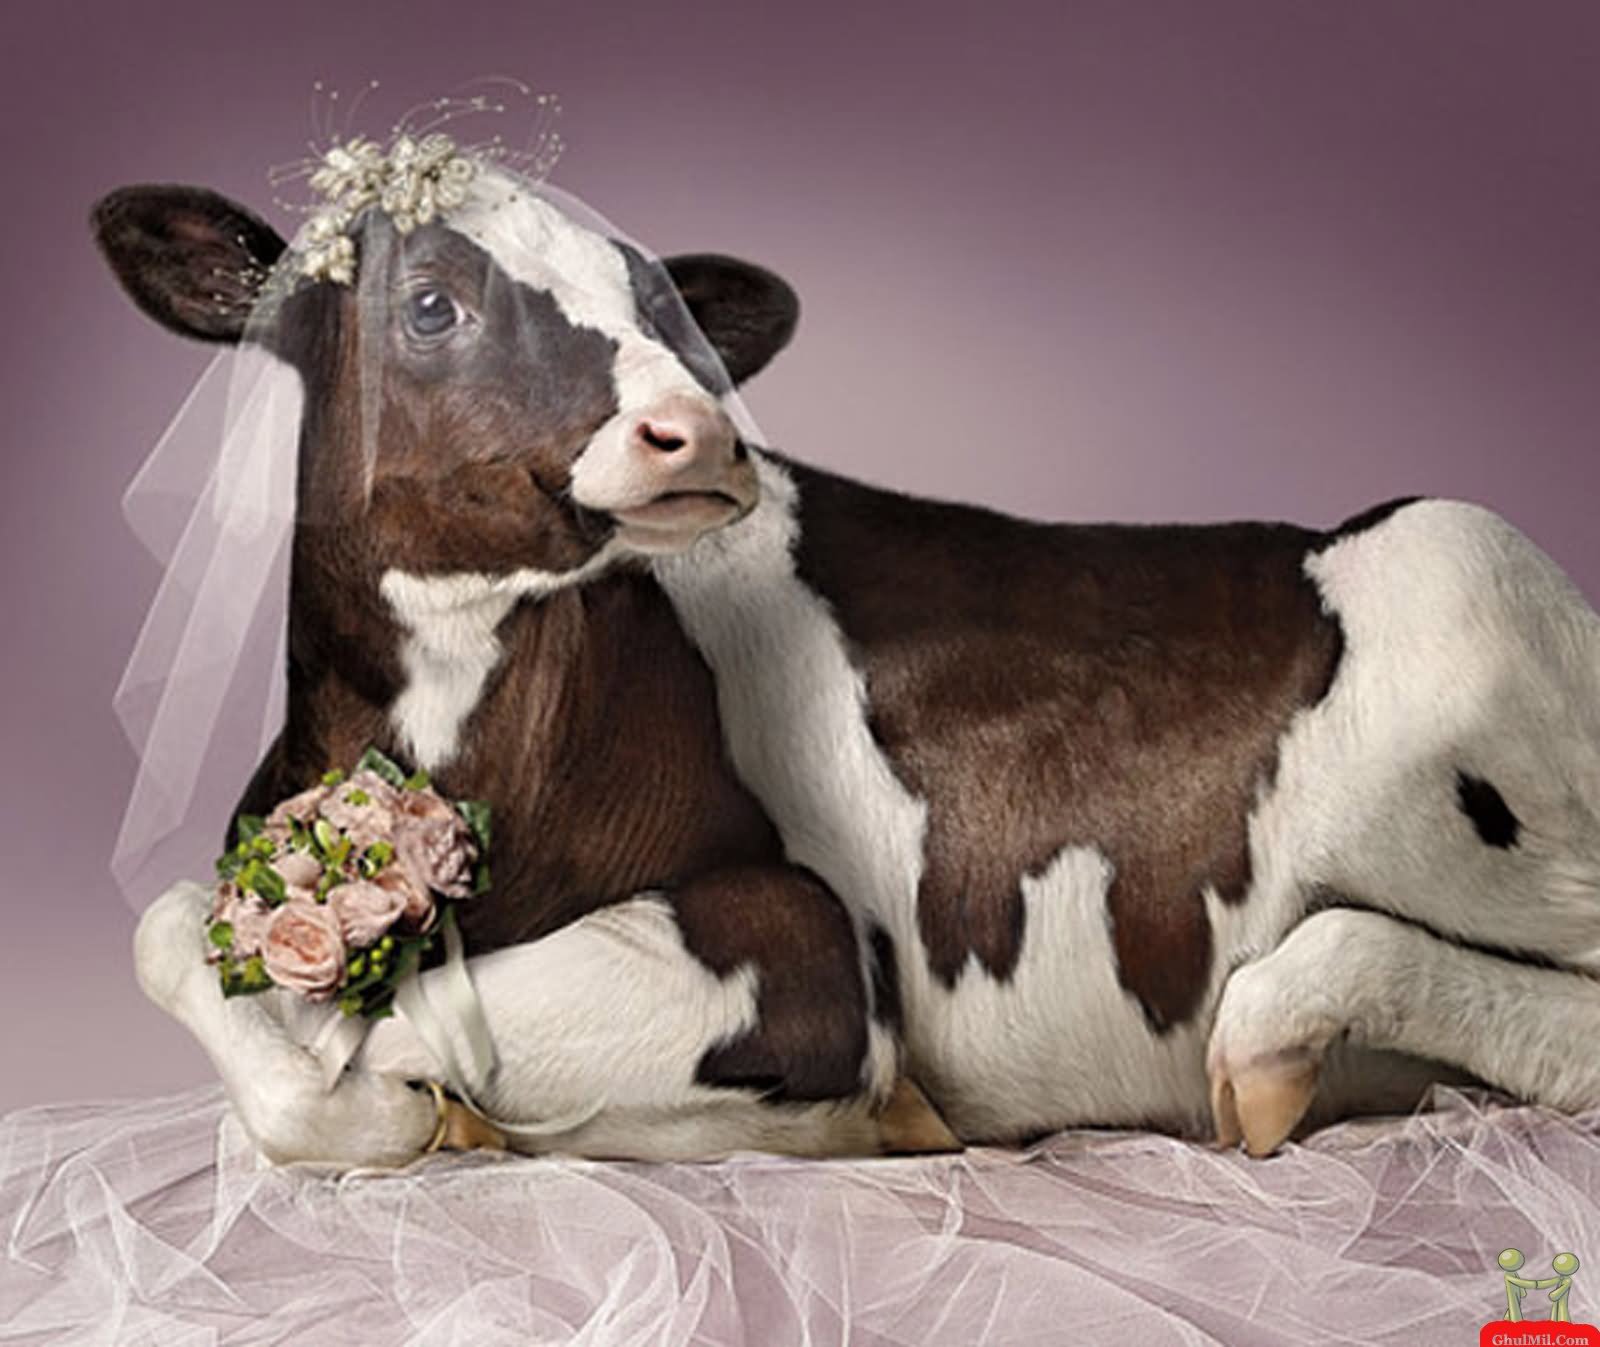 Cow In Funny Bridal Dress